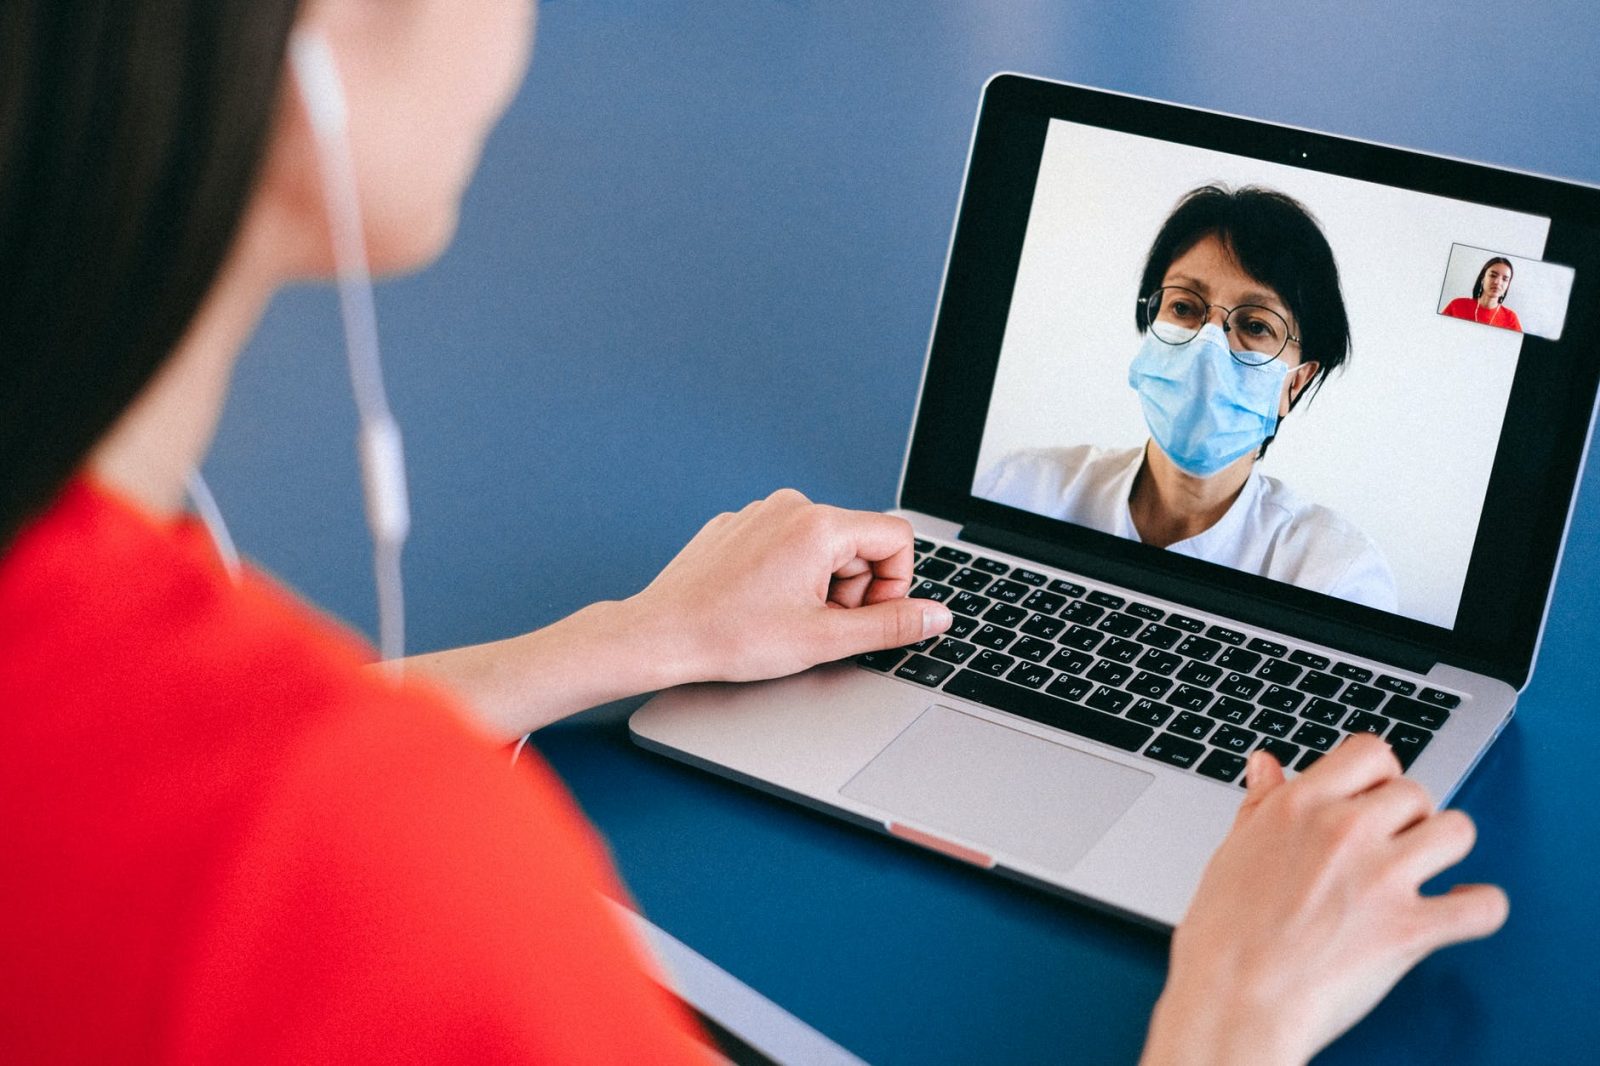 What are the Advantages of Telemedicine?